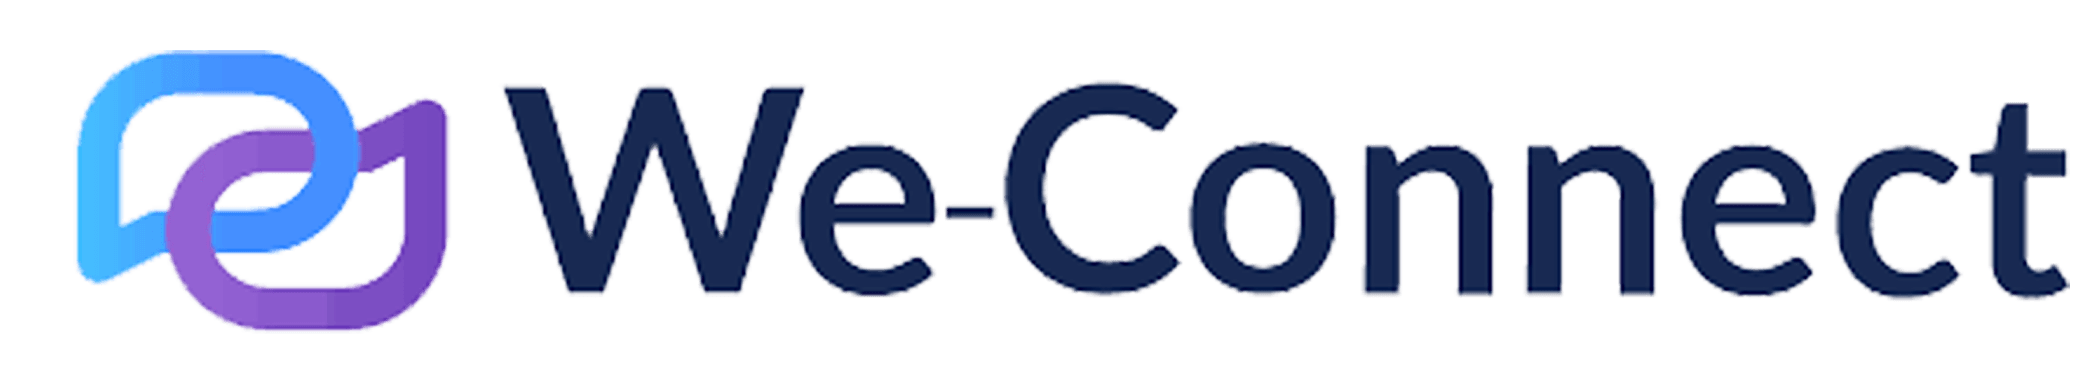 we-connect-logo